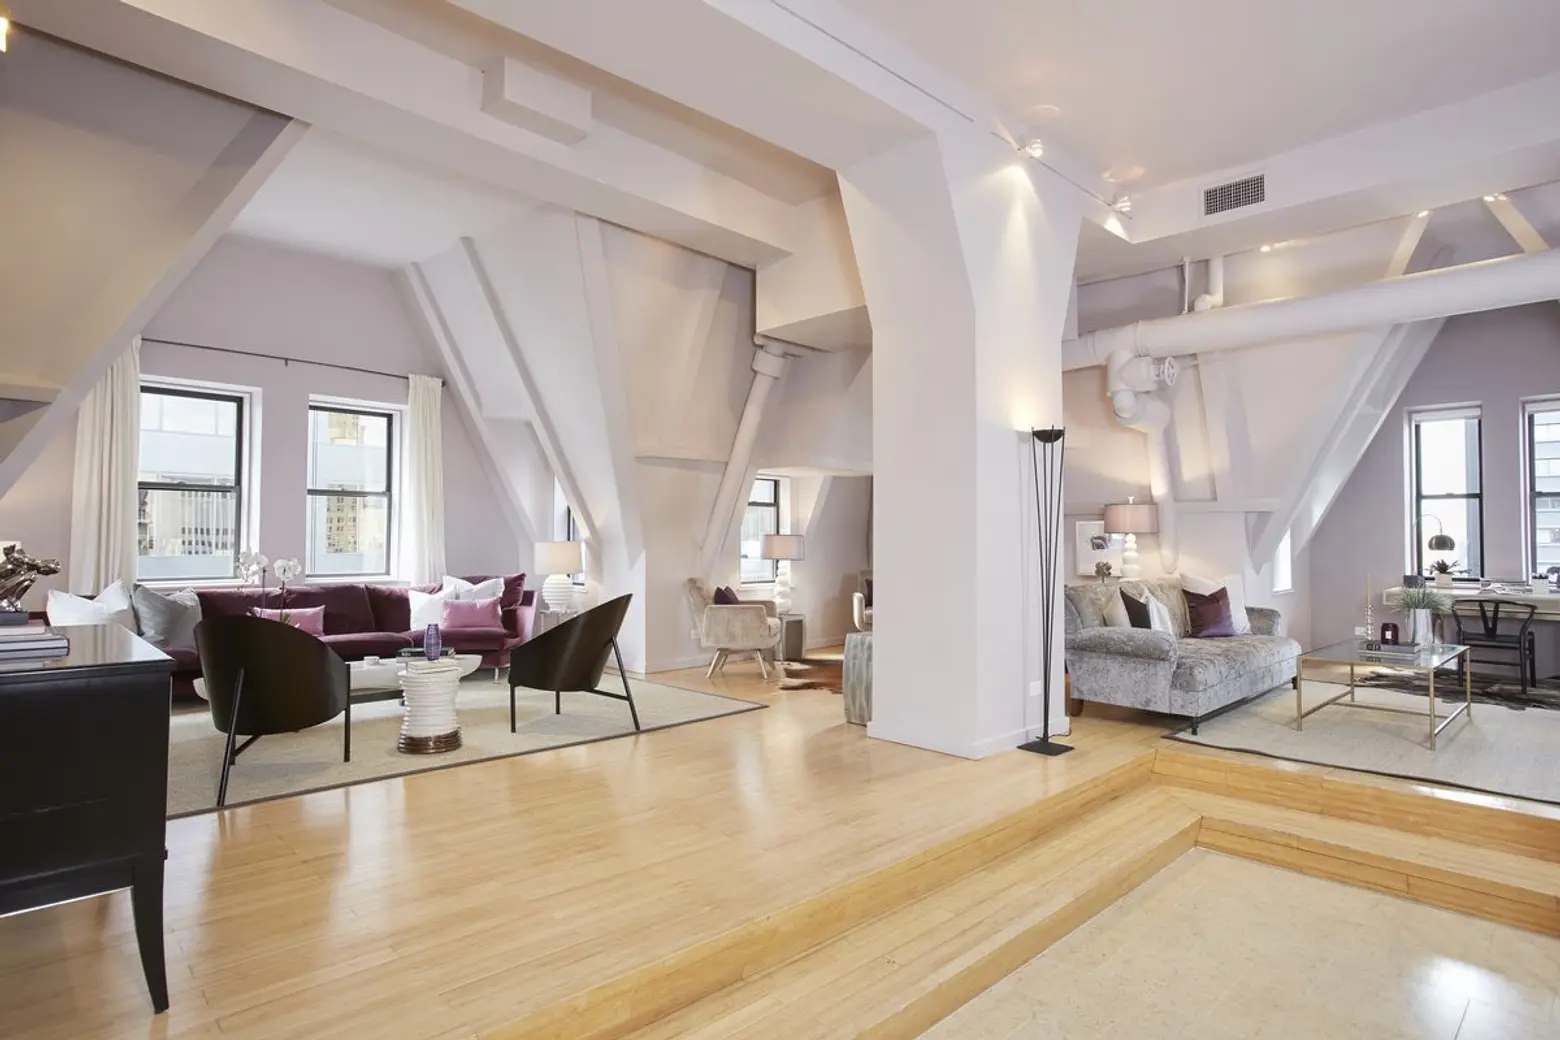 $2.7M FiDi penthouse occupies the former attic of one of NYC’s earliest skyscrapers